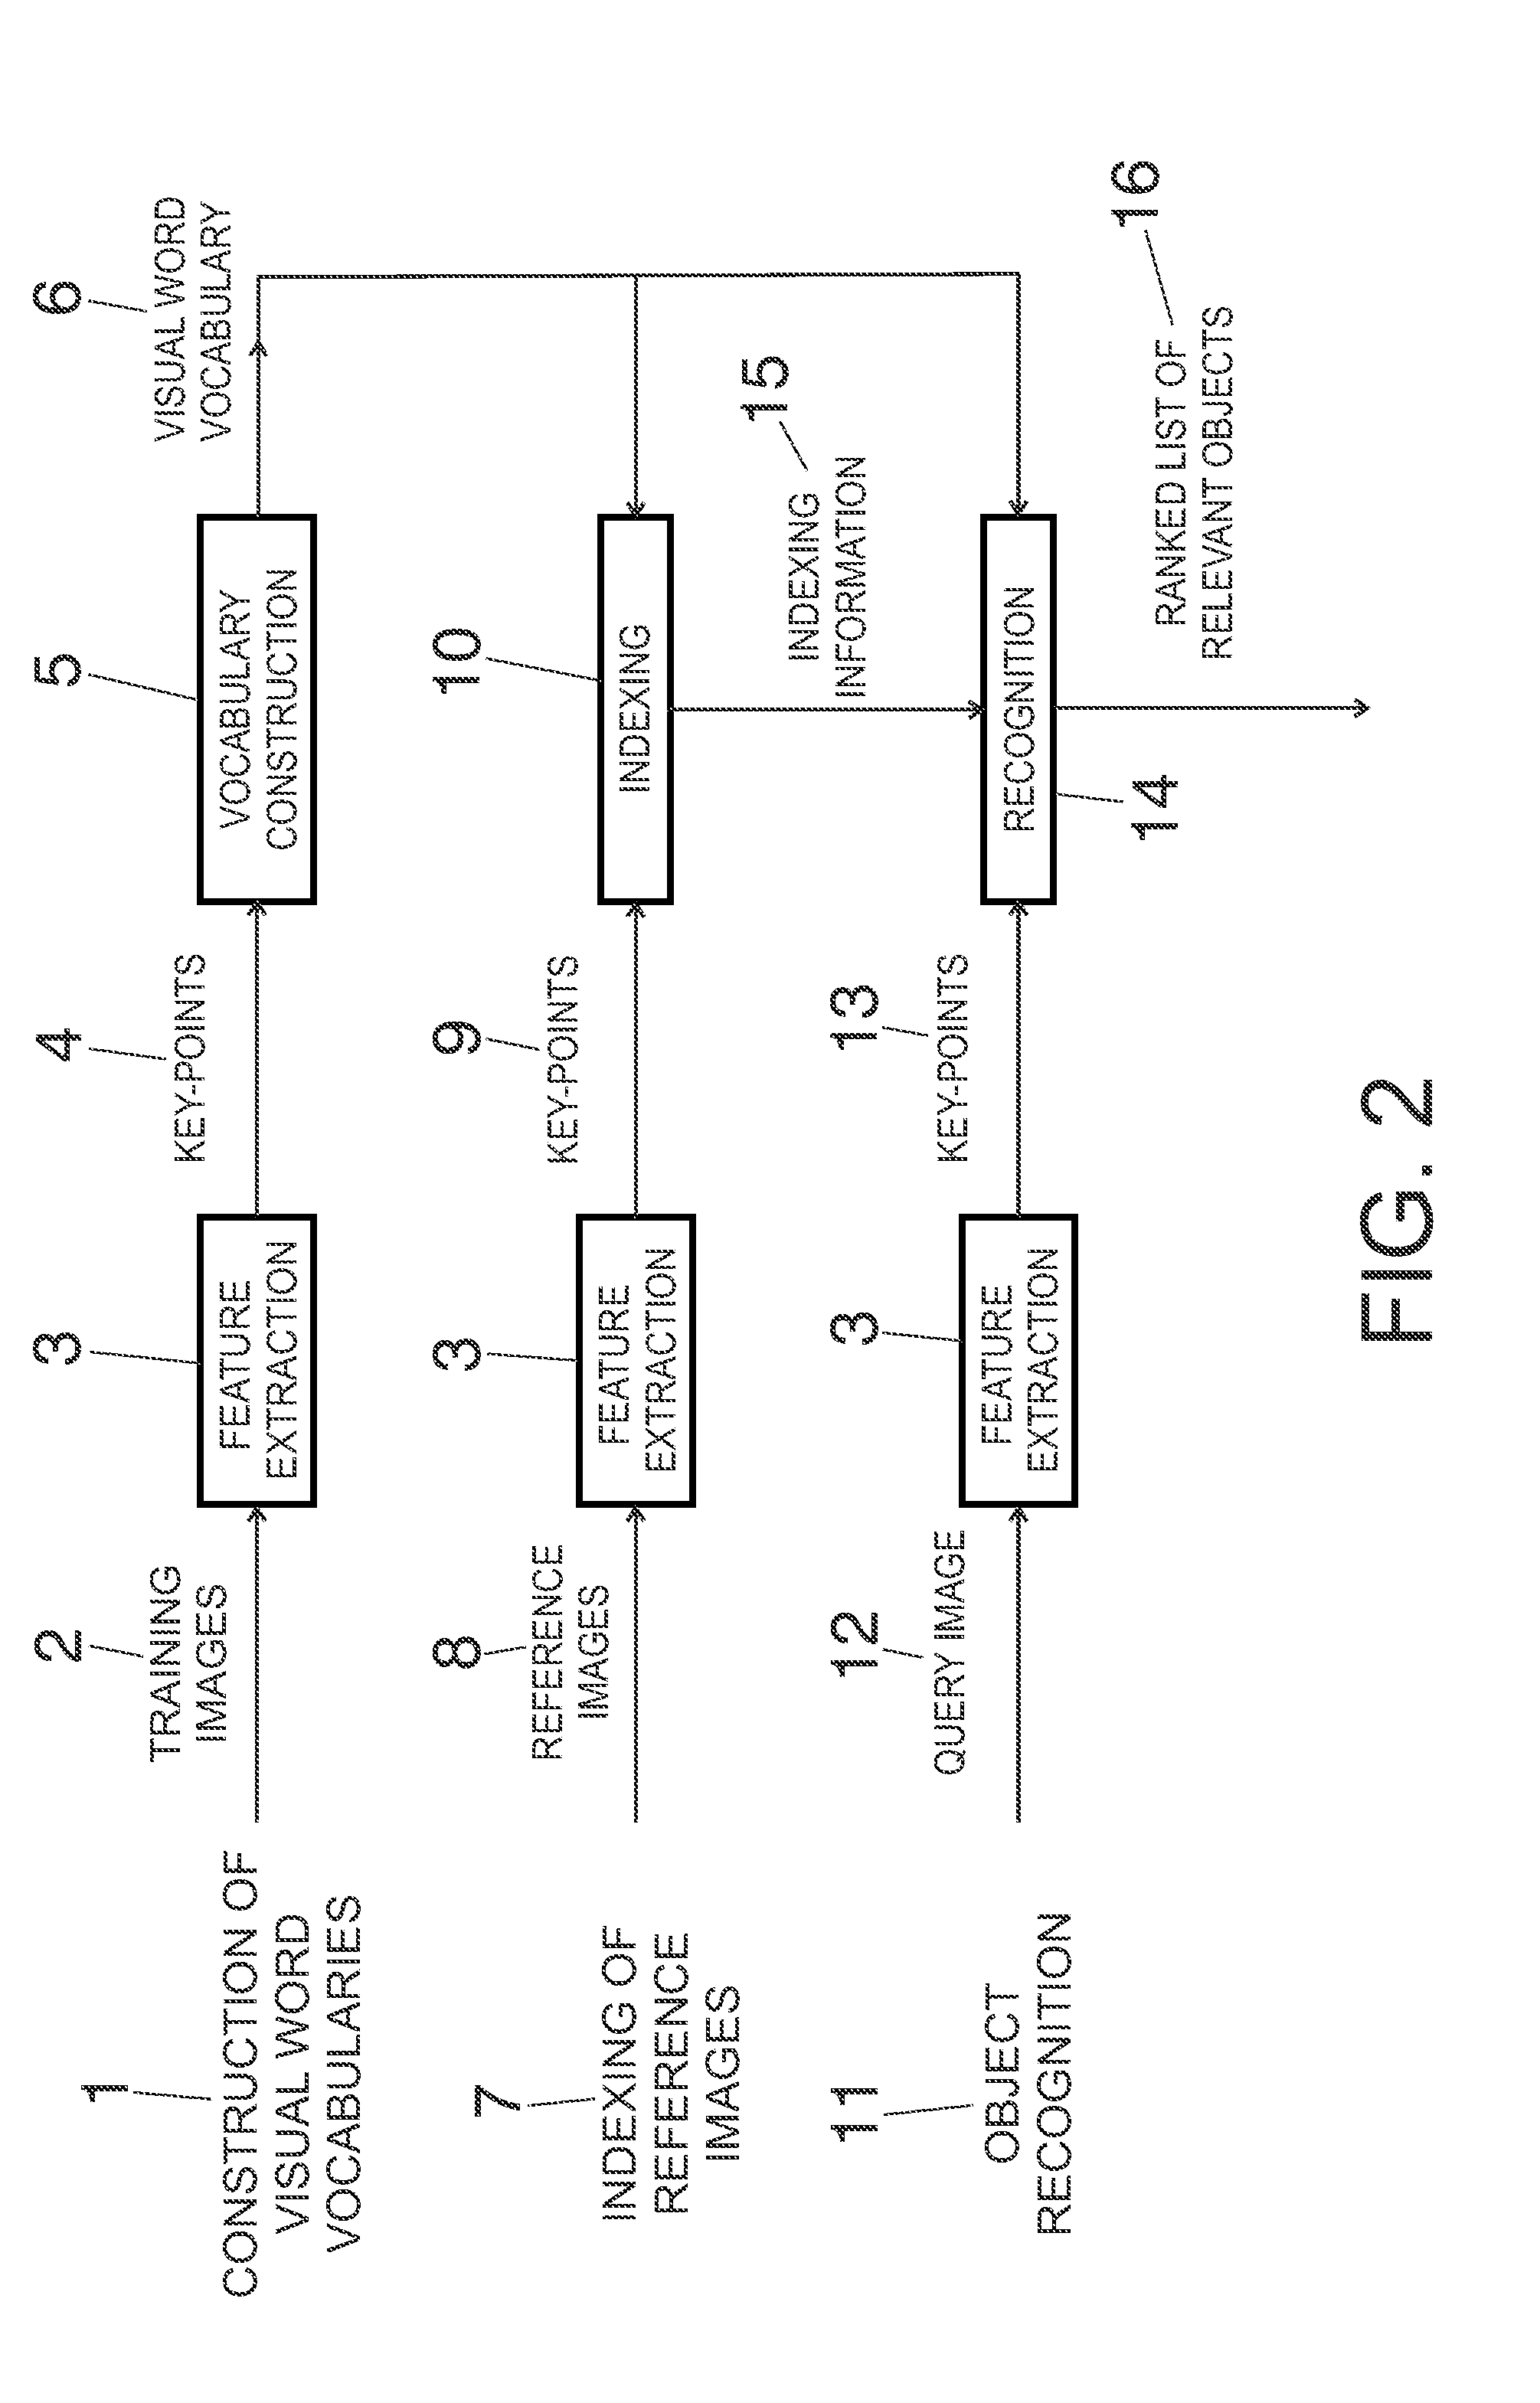 Method and system for fast and robust identification of specific product images